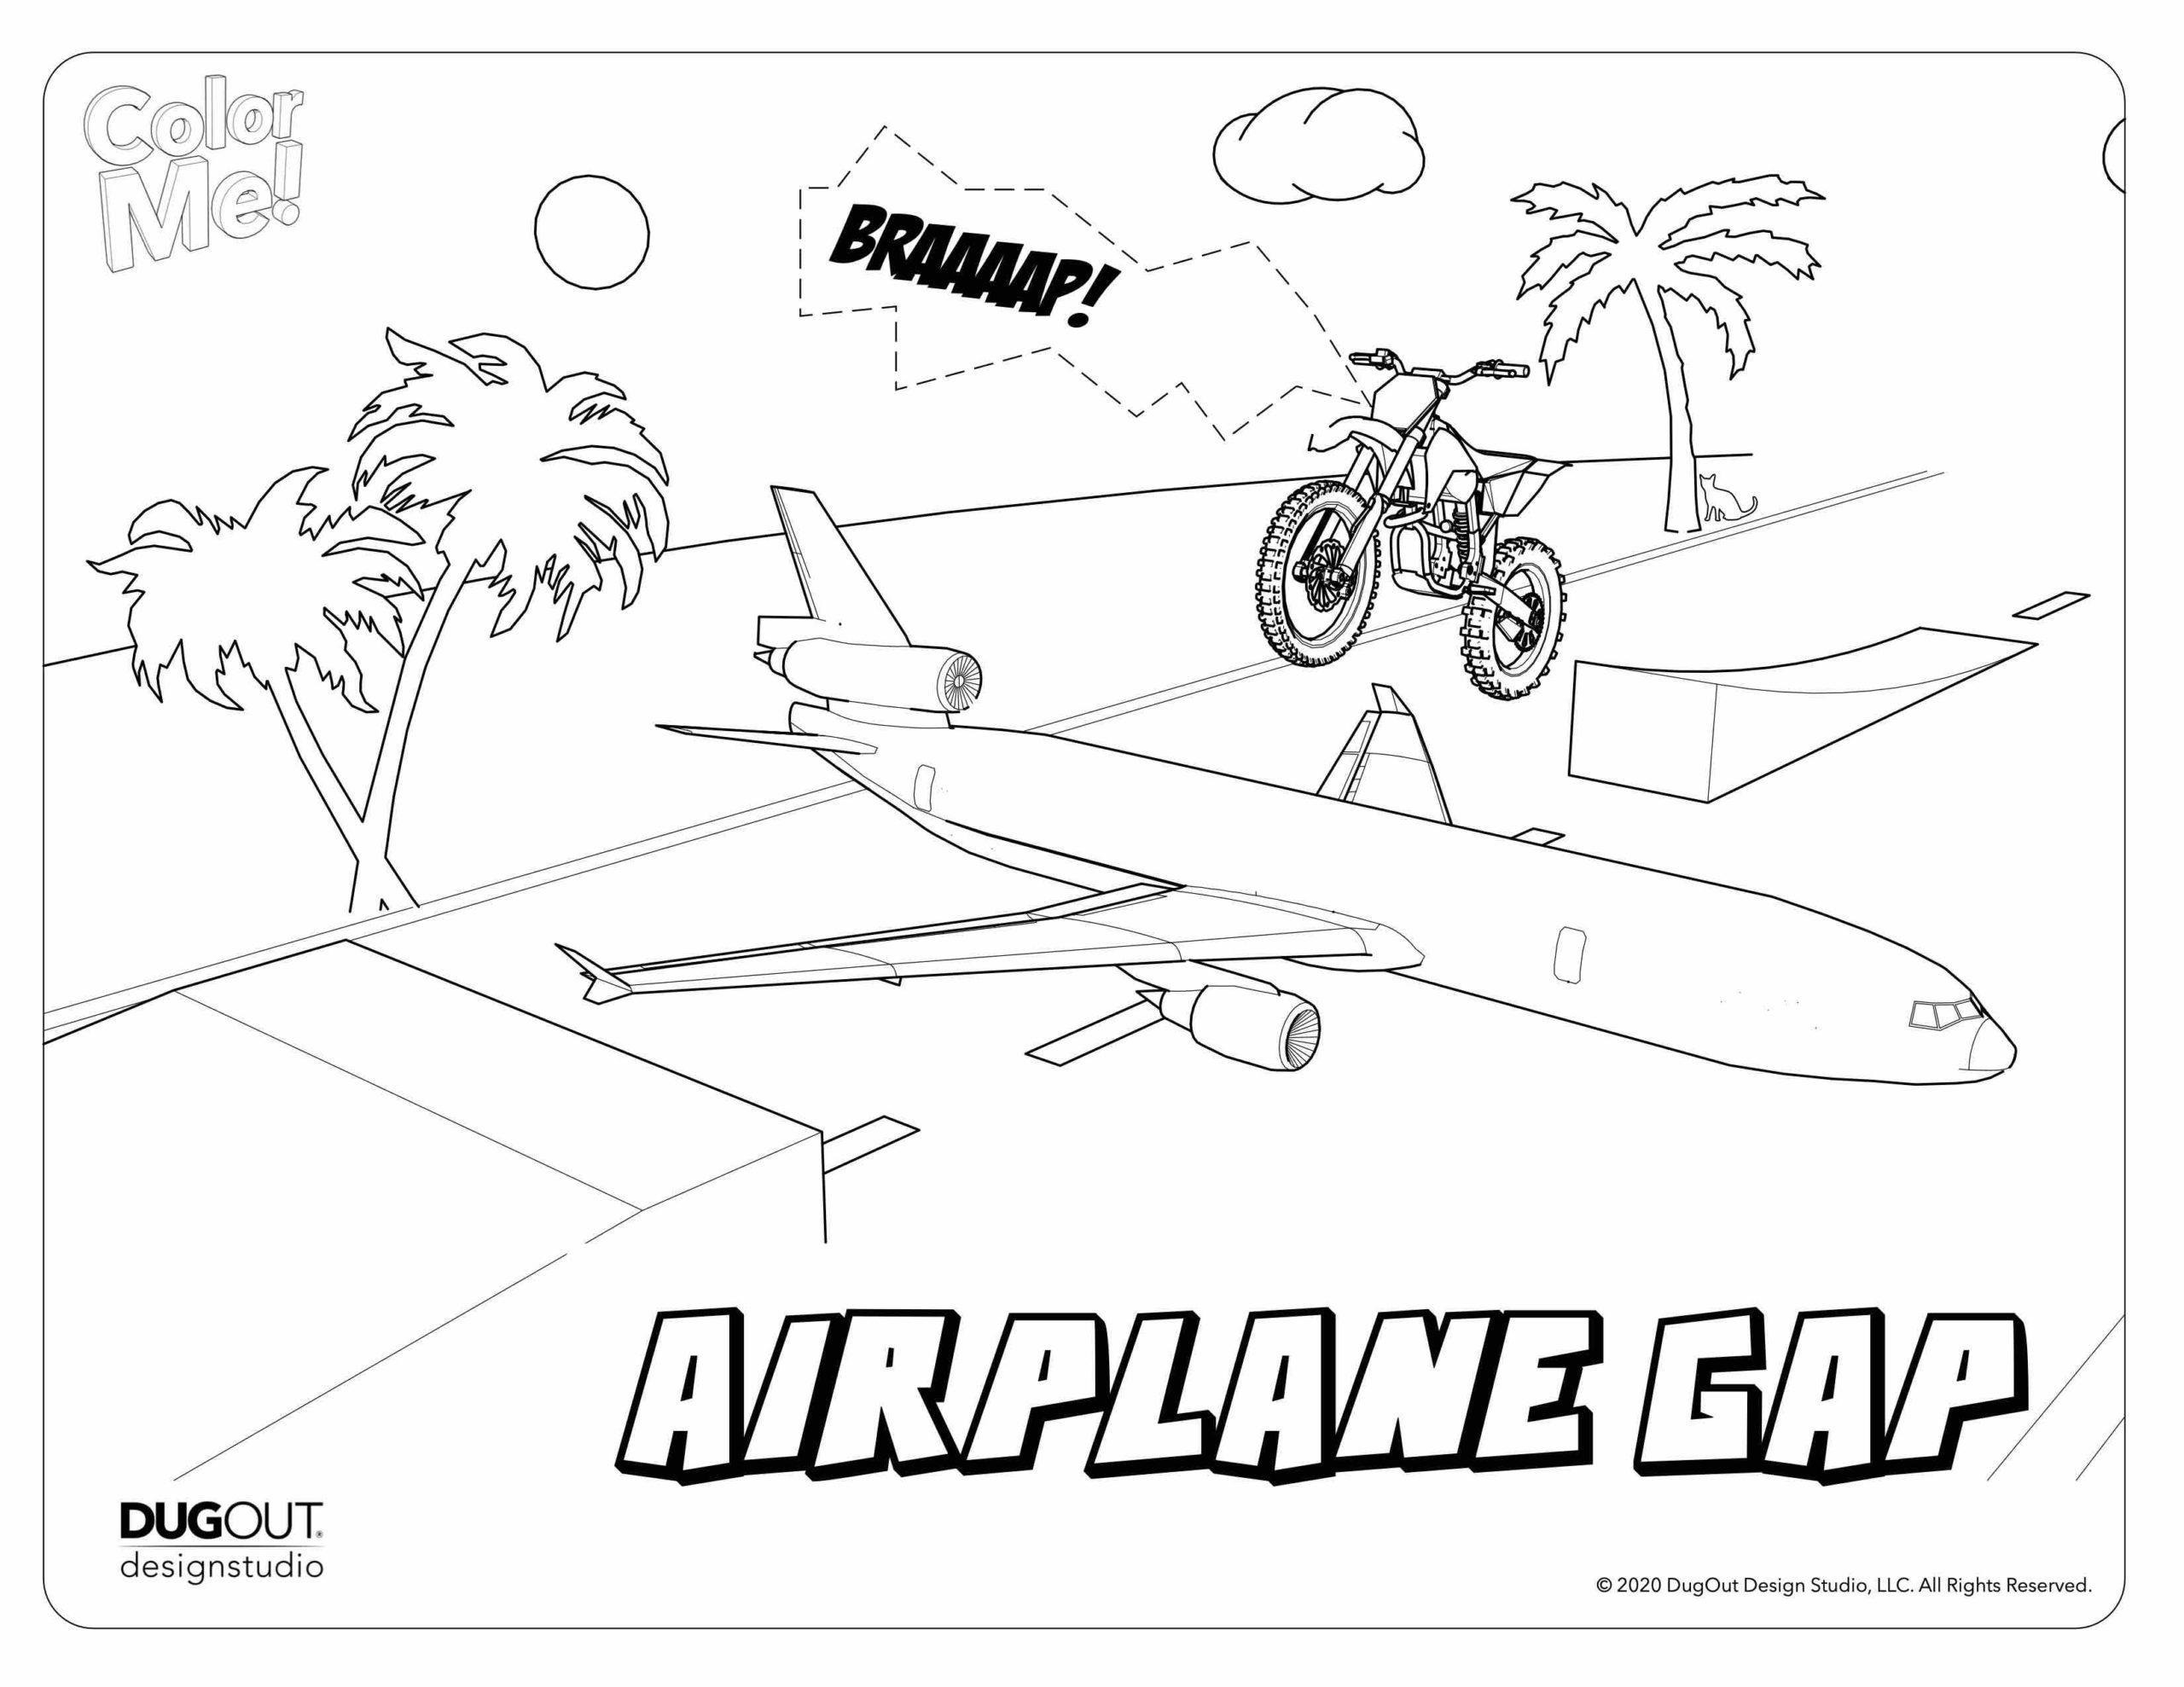 Airplane Gap coloring page with motorcycle launching over airplane